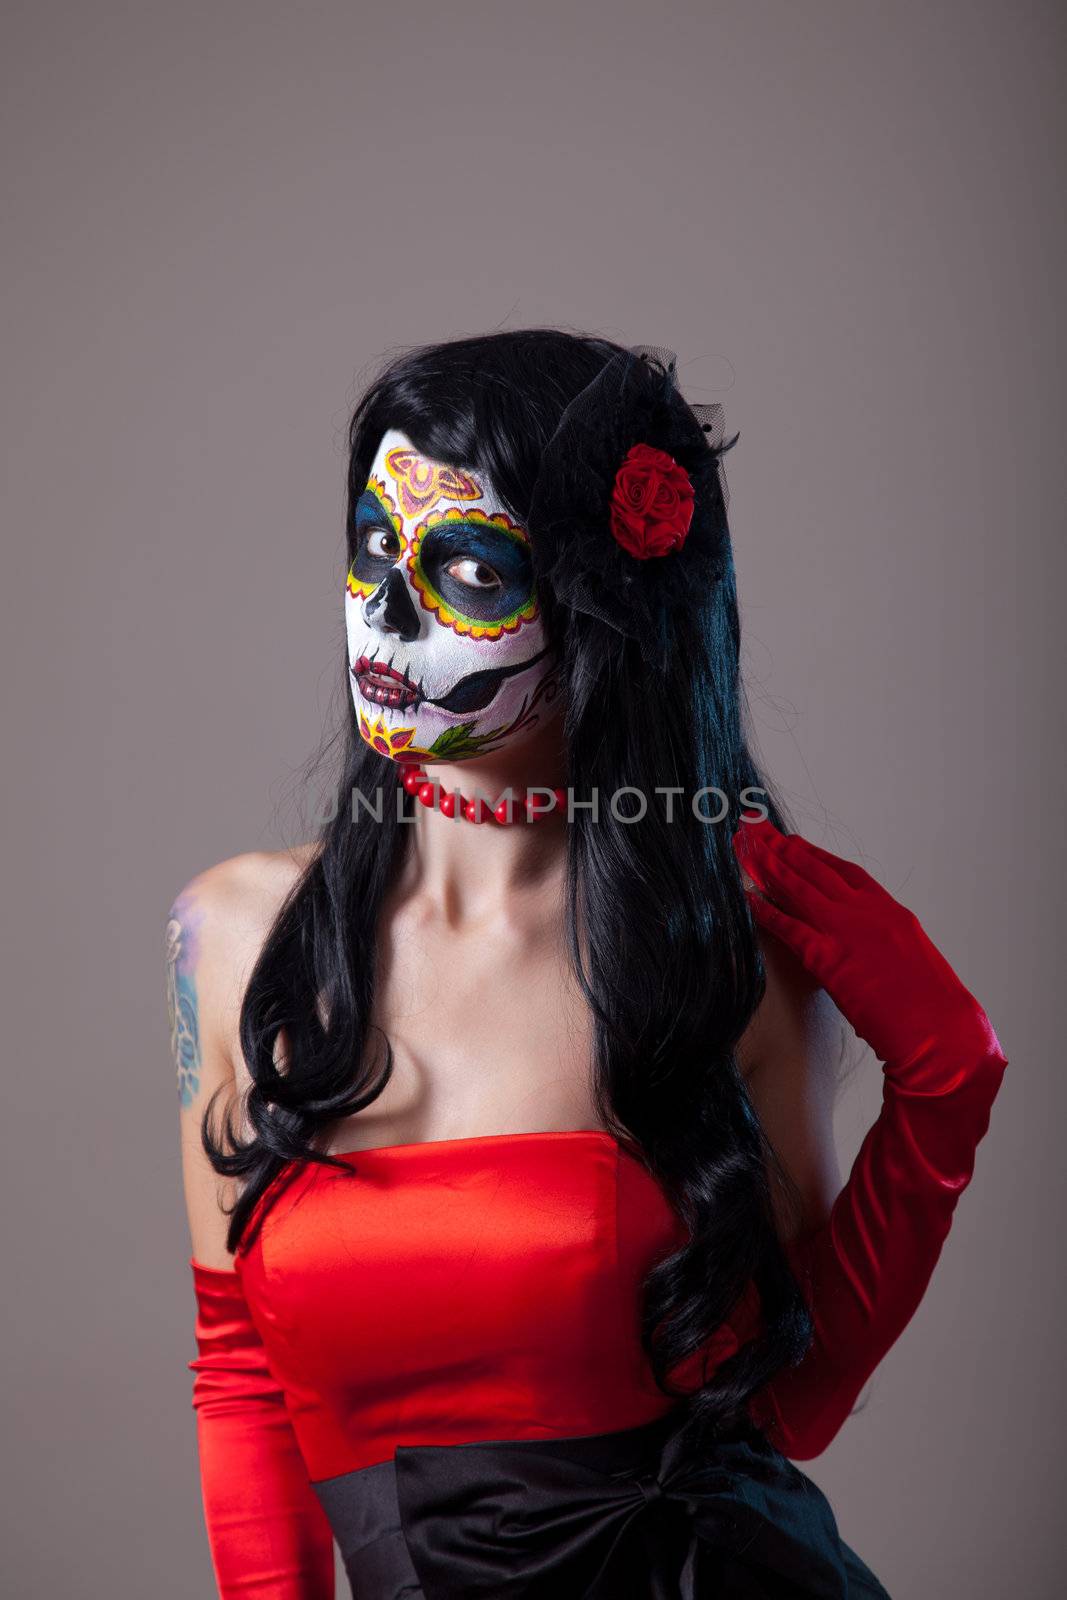 Woman with sugar skull make-up wearing red dress, the Day of the Dead 